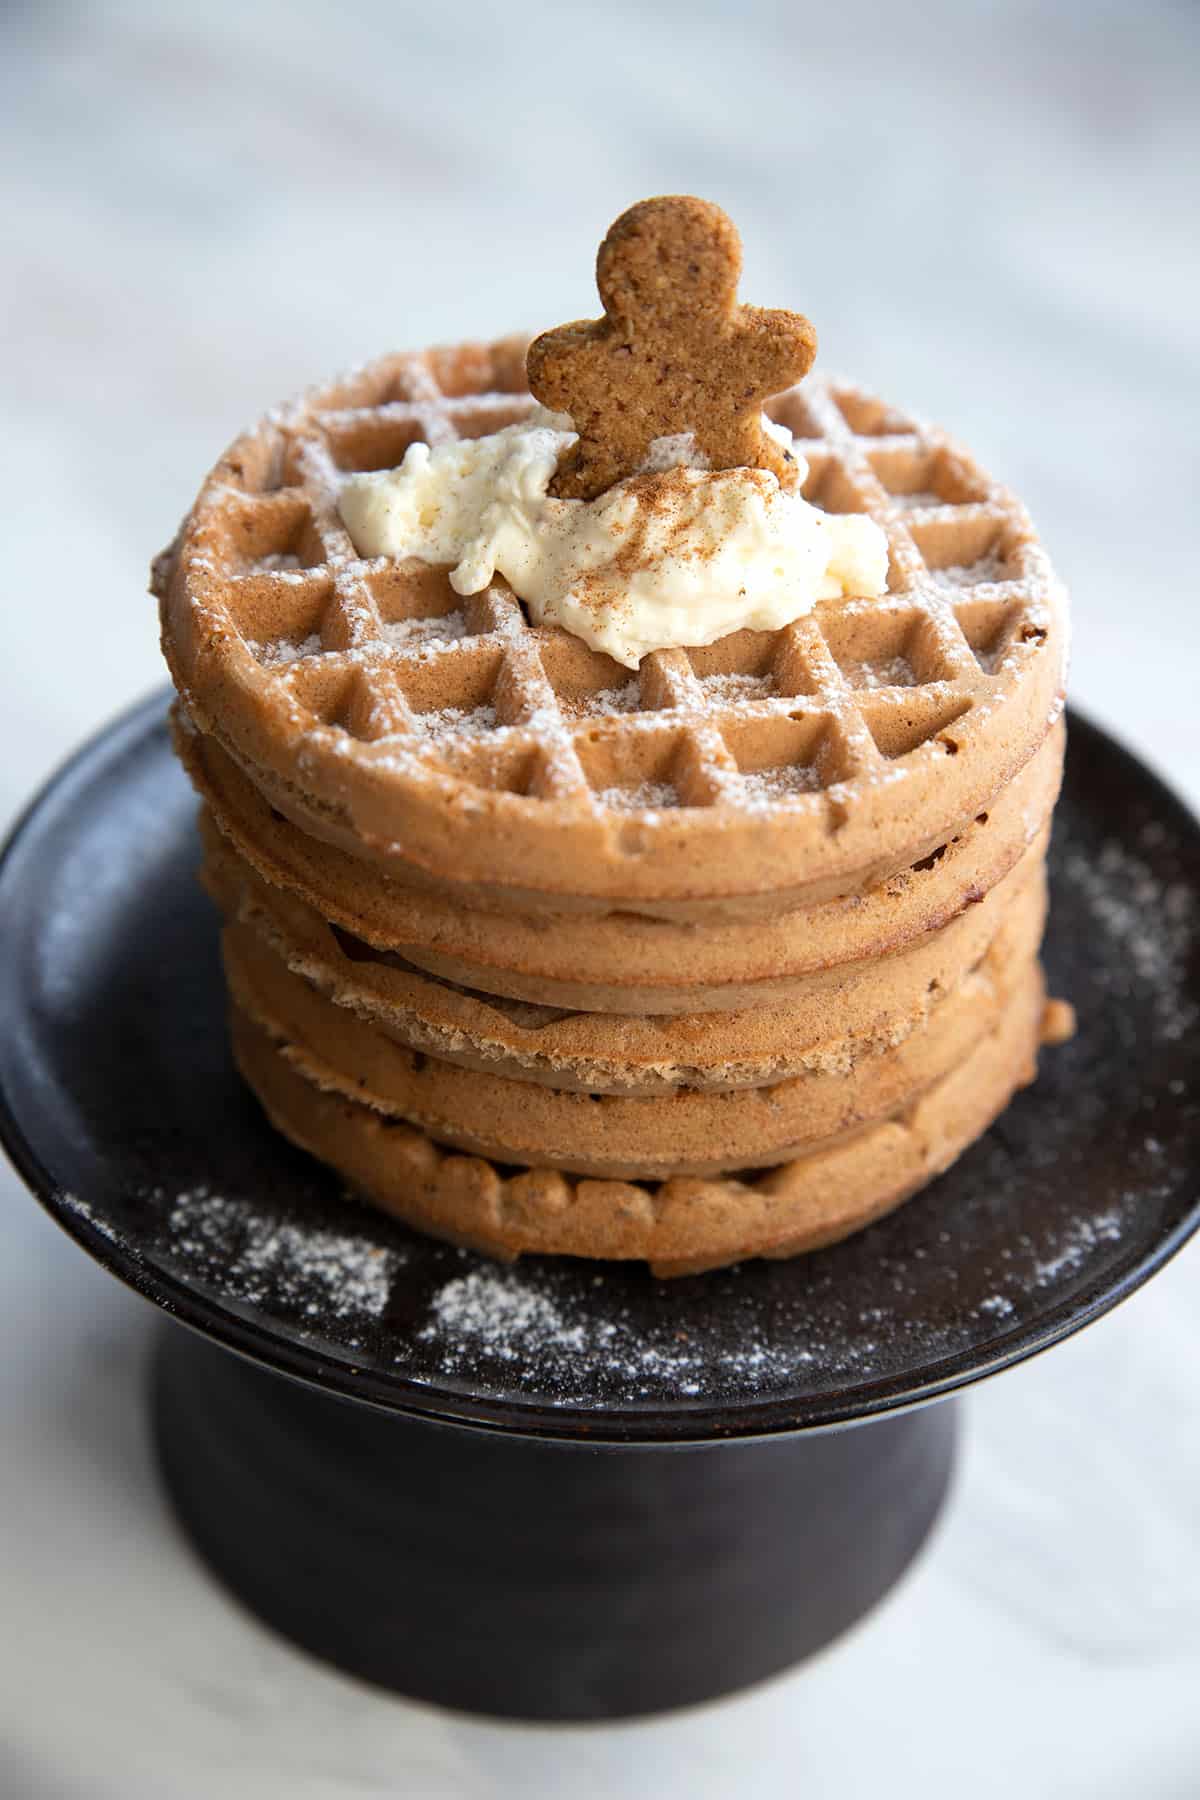 A stack of Keto Gingerbread Waffles on a black cake stand.